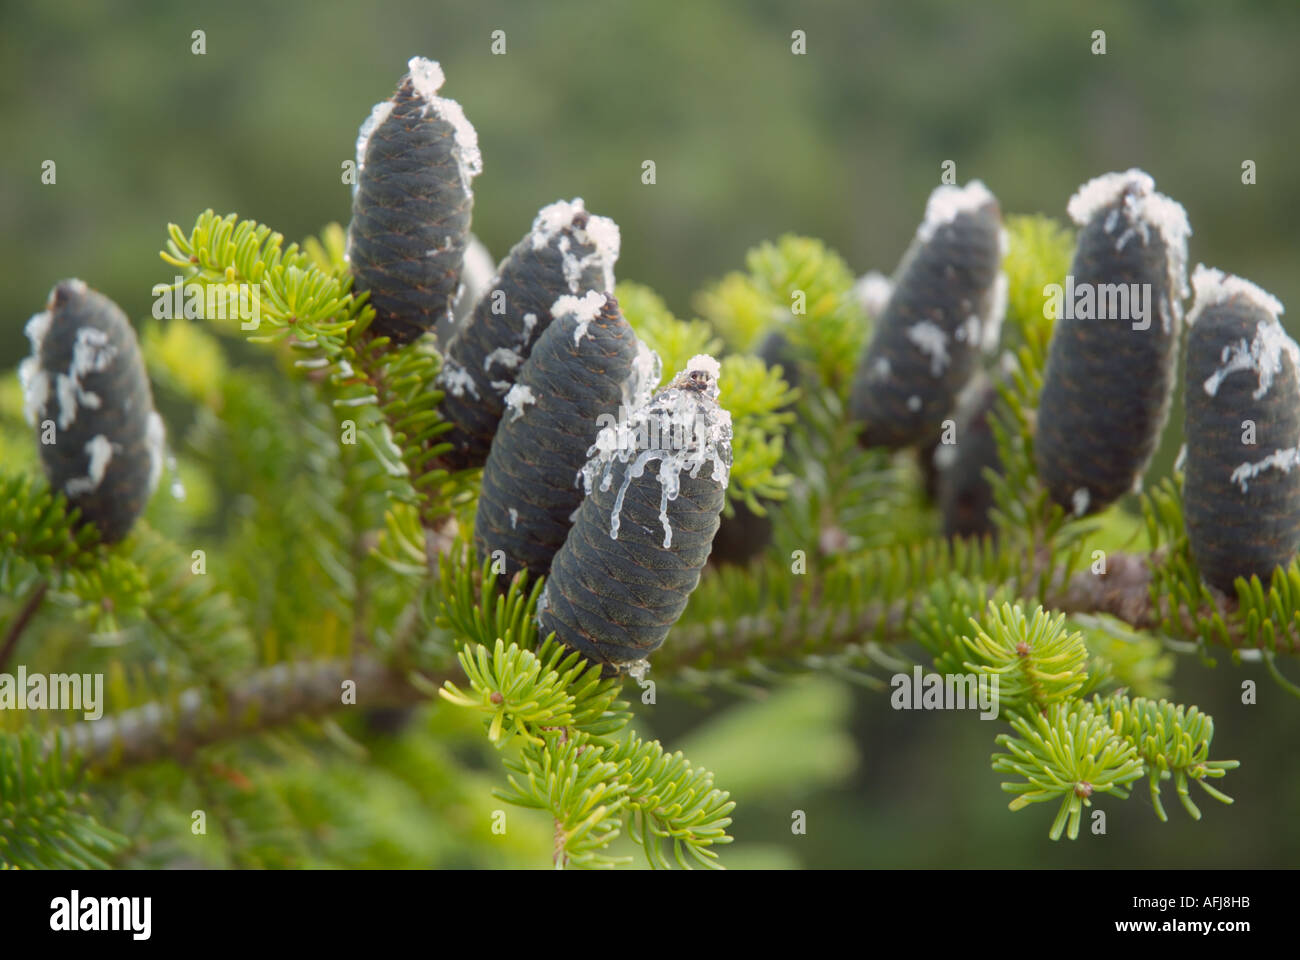 Balsam Fir (Abies balsamea) in  New Hampshire, which is part of the New England  USA Stock Photo